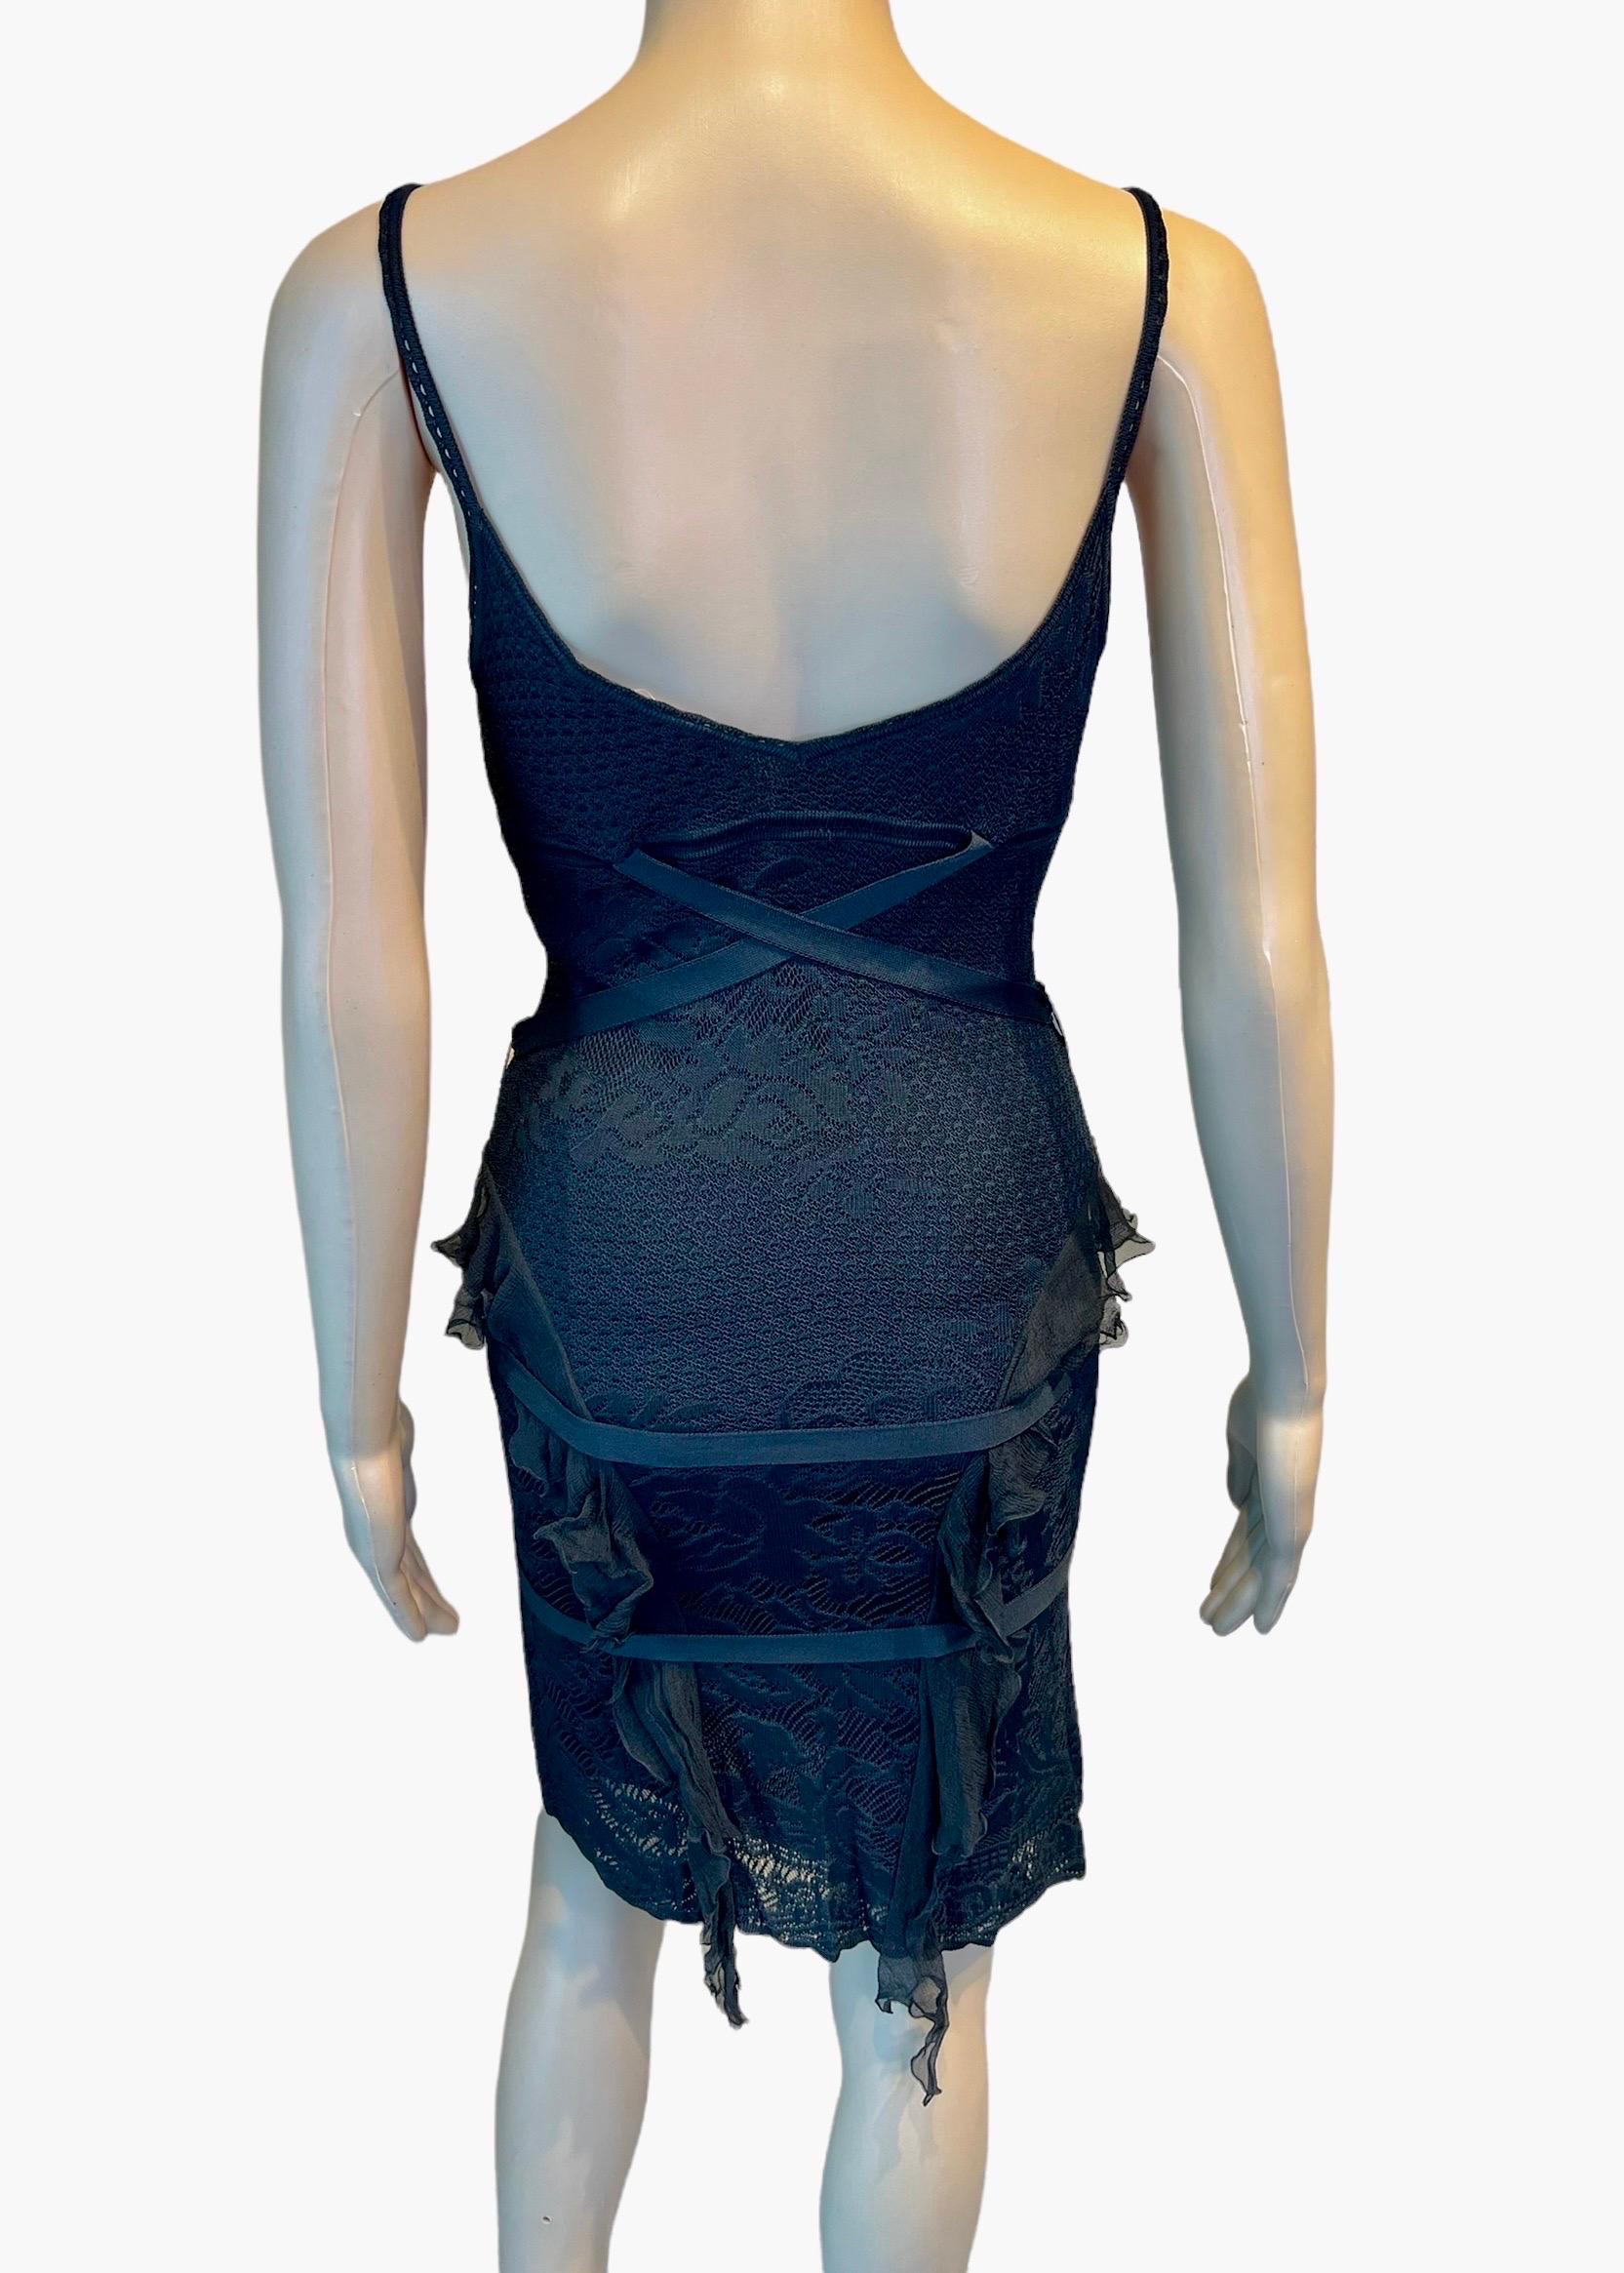 Christian Dior by John Galliano S/S 2003 Sheer Lace Bondage Knit Black Dress  For Sale 3